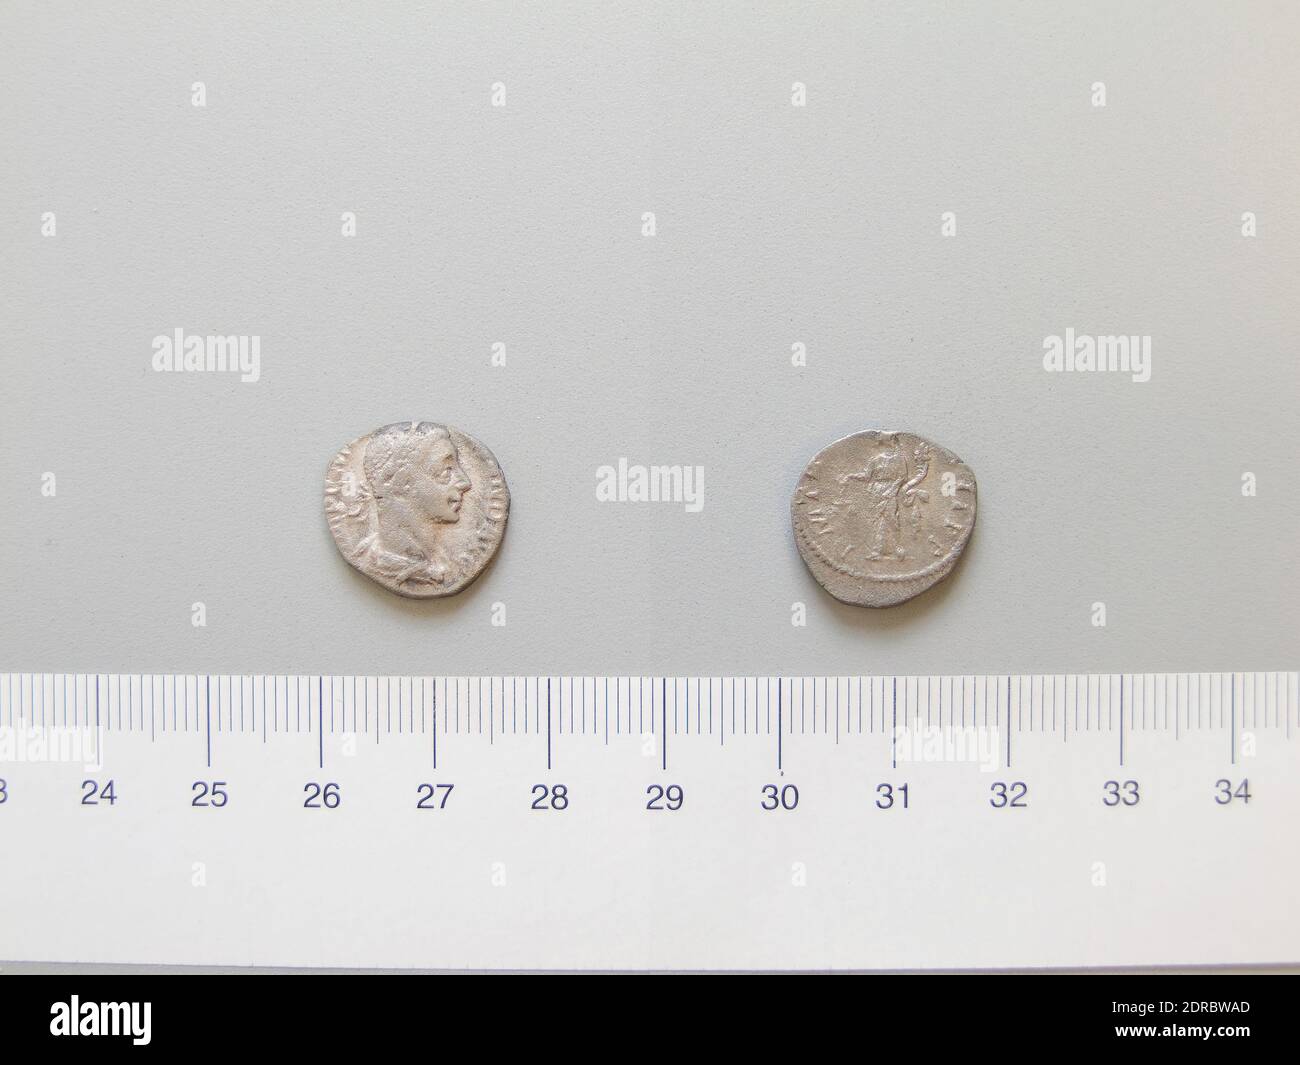 Ruler: Severus Alexander, Emperor of Rome, A.D. 208–235, ruled A.D. 222–35, Mint: Rome, Denarius of Severus Alexander, Emperor of Rome from Rome, 227, Silver, 1.76 g, 12:00, 17 mm, Made in Rome, Italy, Roman, 3rd century A.D., Numismatics Stock Photo